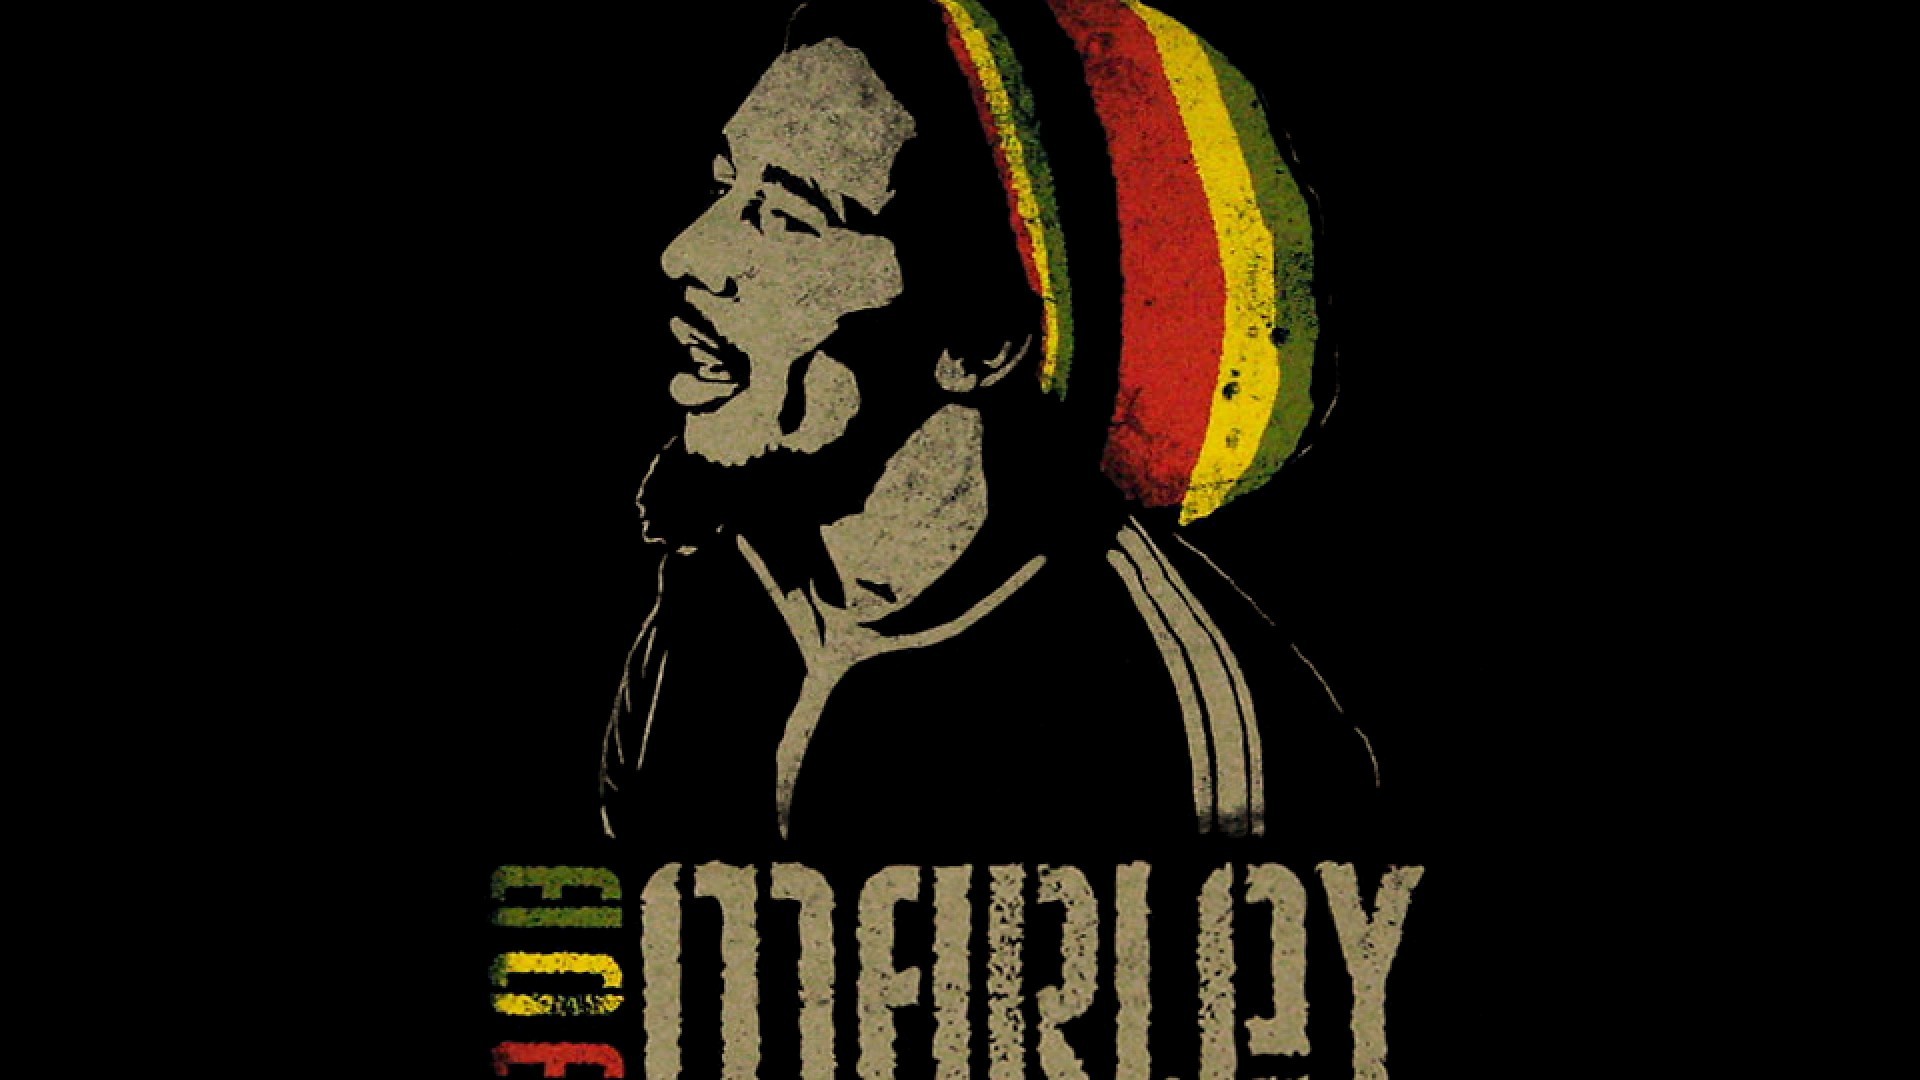 1920x1080 Images for Gt Reggae Iphone Wallpaper